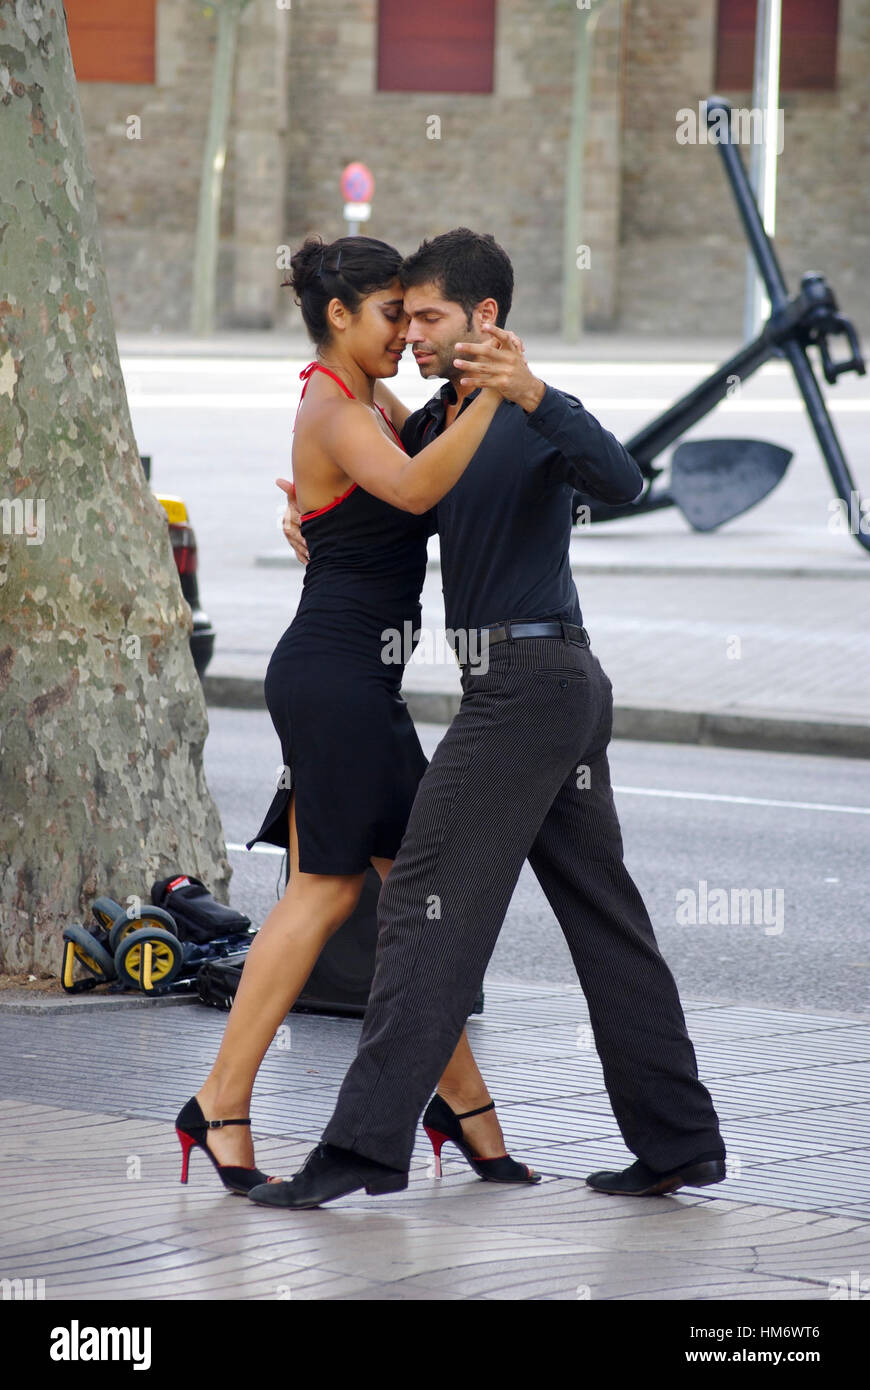 BARCELONA,ES - CIRCA JULY, 2008 - Tango dancers along the streets in Barcelona. La Rambla is the more famous road of Barcelona and is frequented by ma Stock Photo